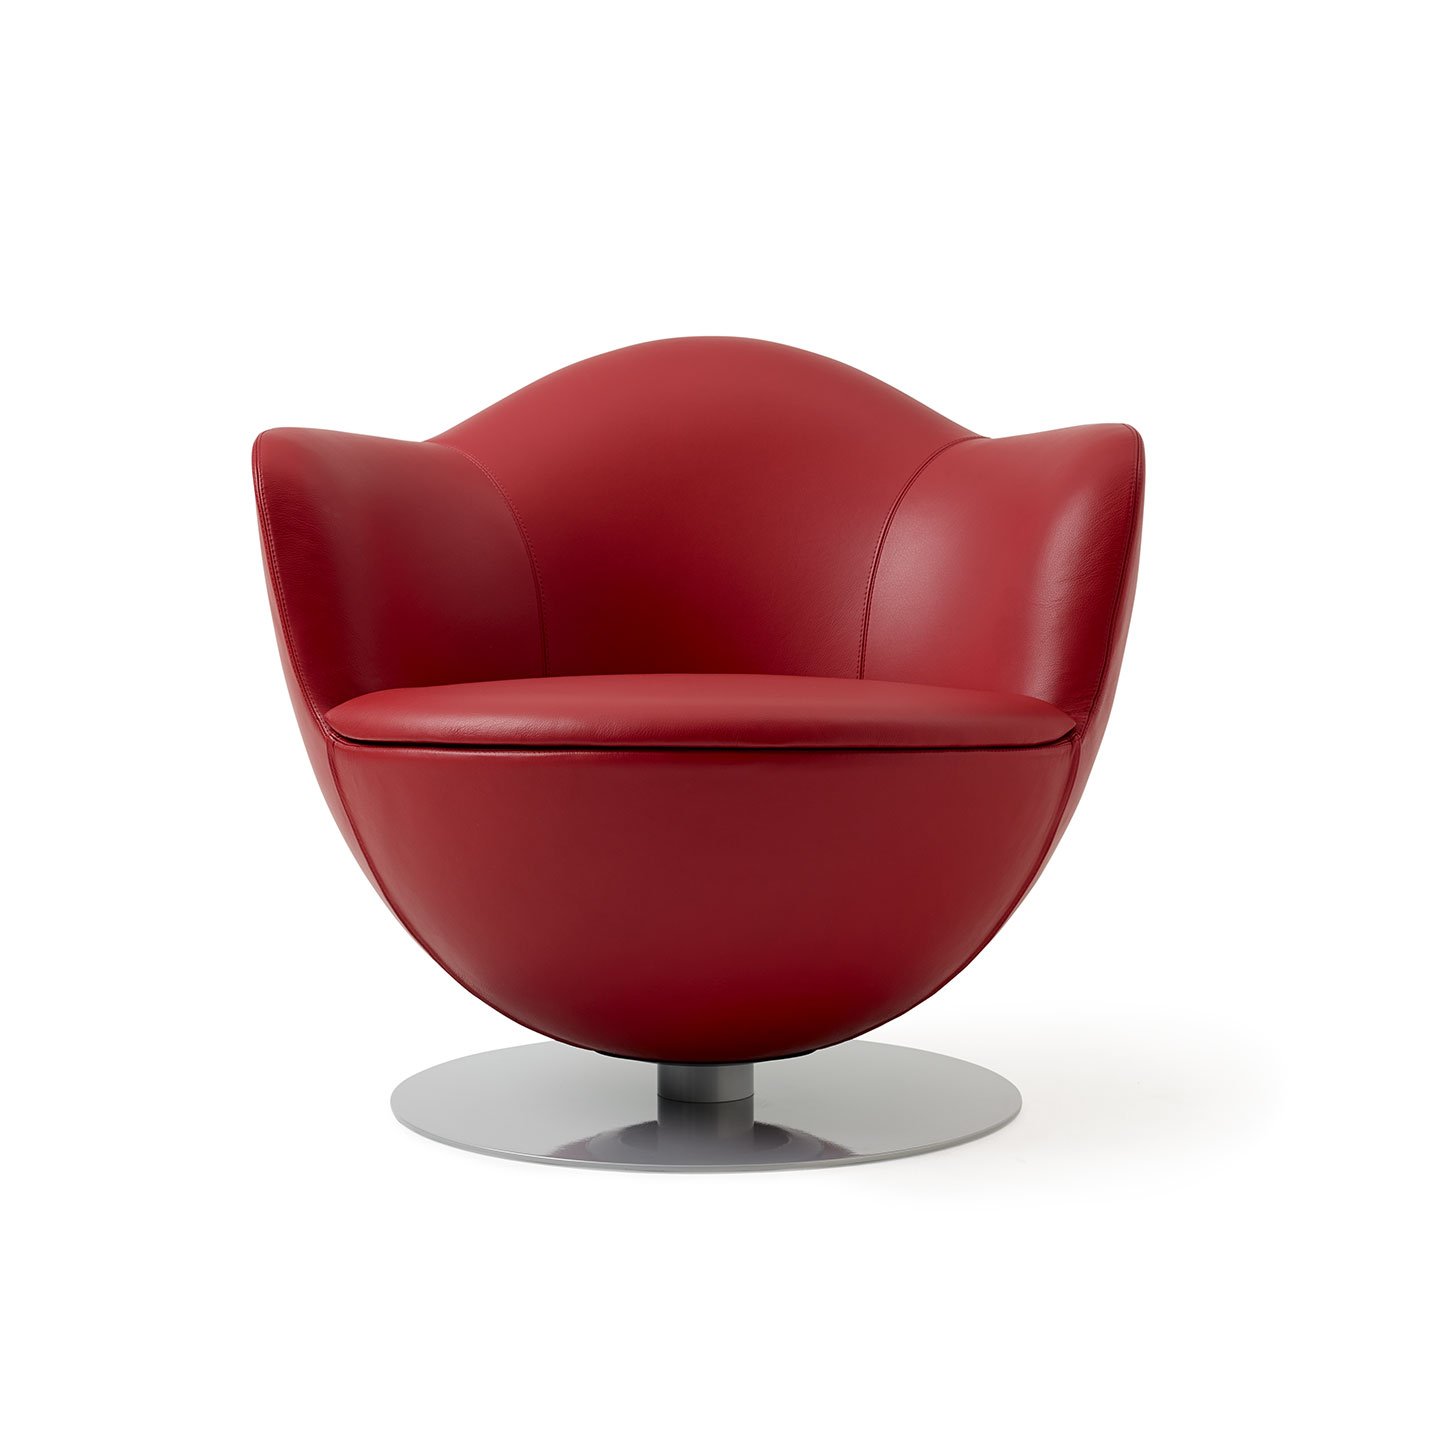 Haworth Dalia lounge chair in red leather, round metal base front view